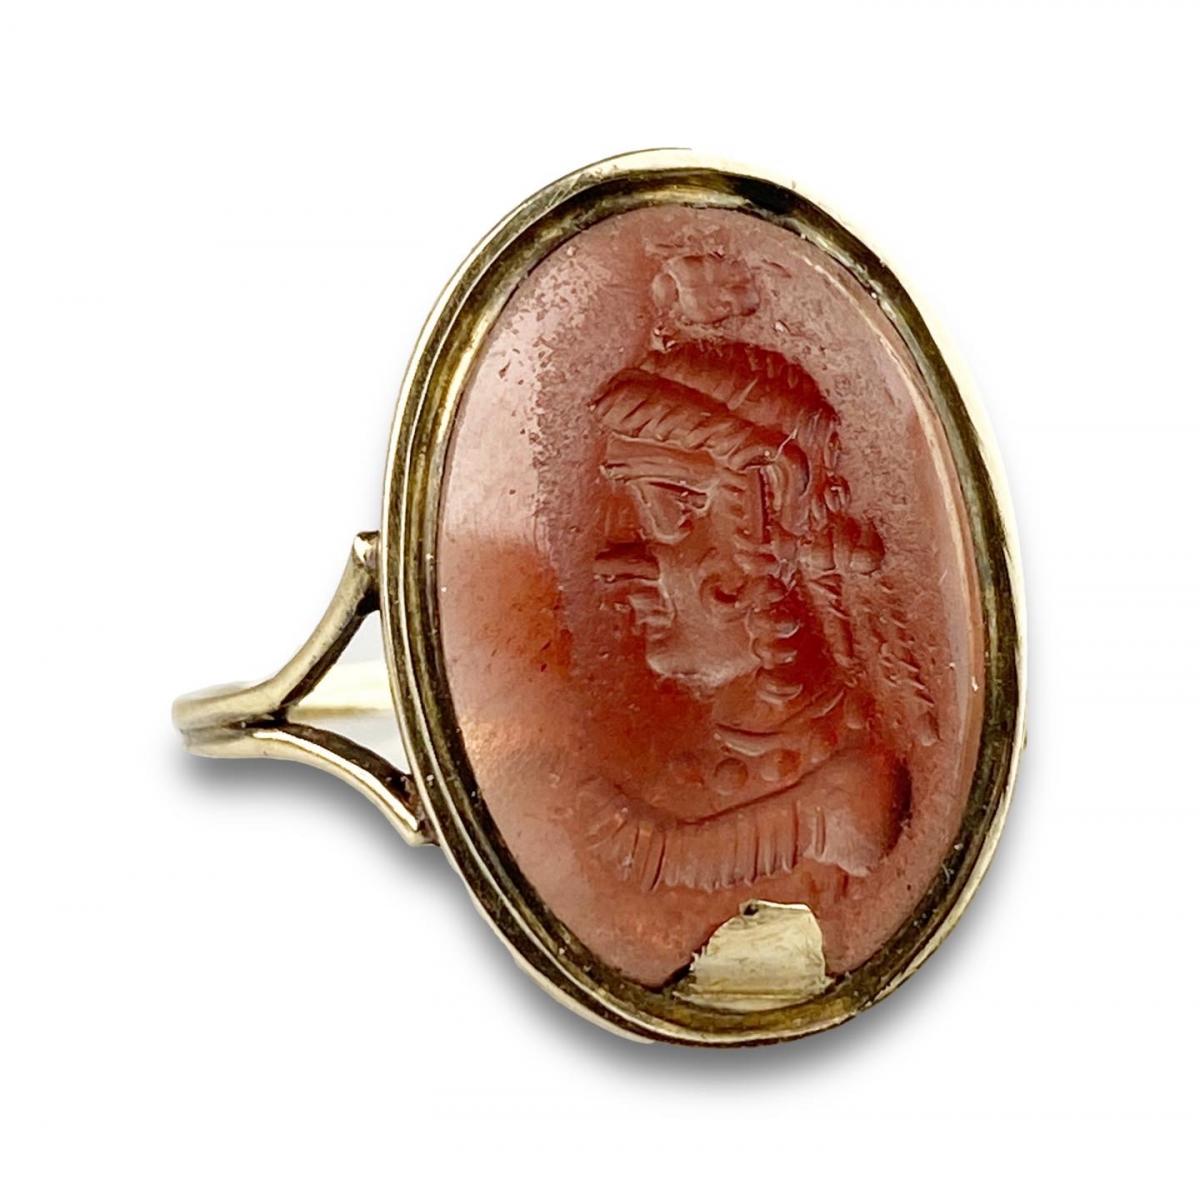 Ring with a Ptolemaic, Hellenistic intaglio of a Goddess. 2nd - 1st Century BC